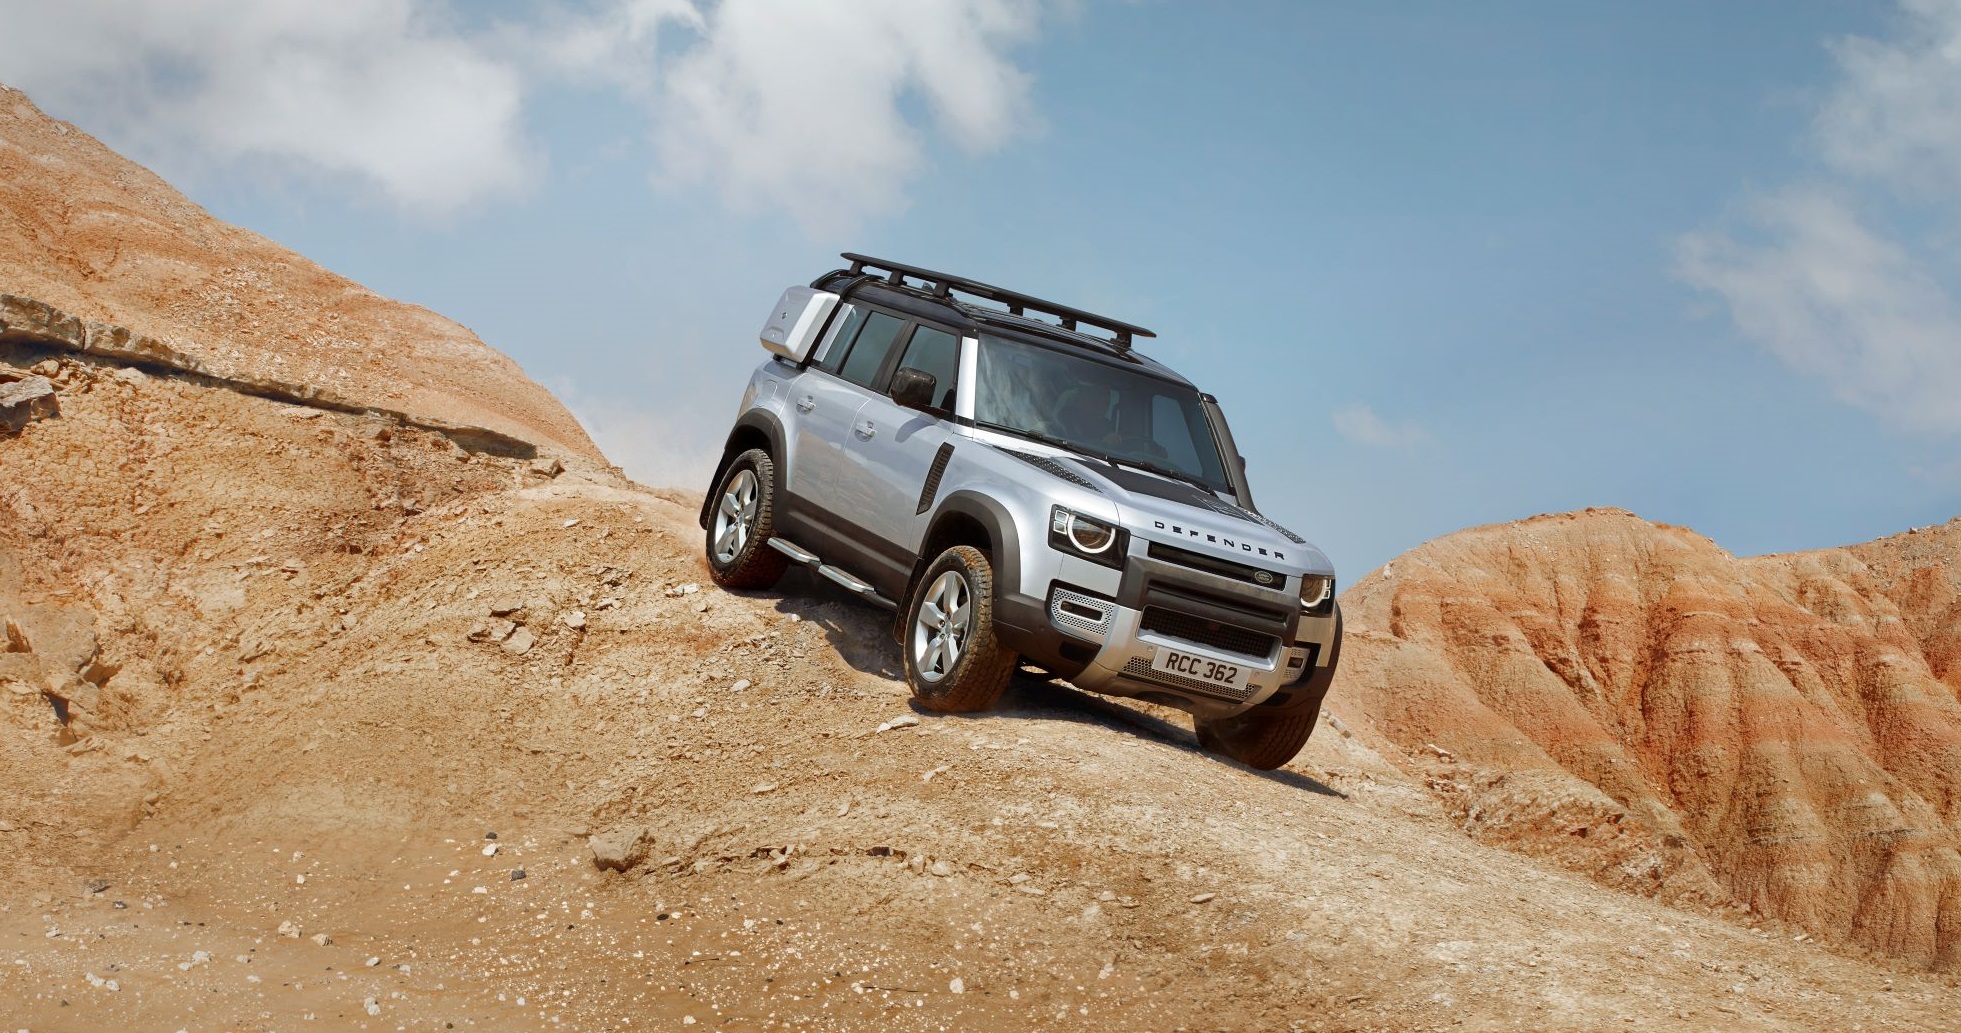 The new Land Rover Defender will be launched in Malaysia on 21 October